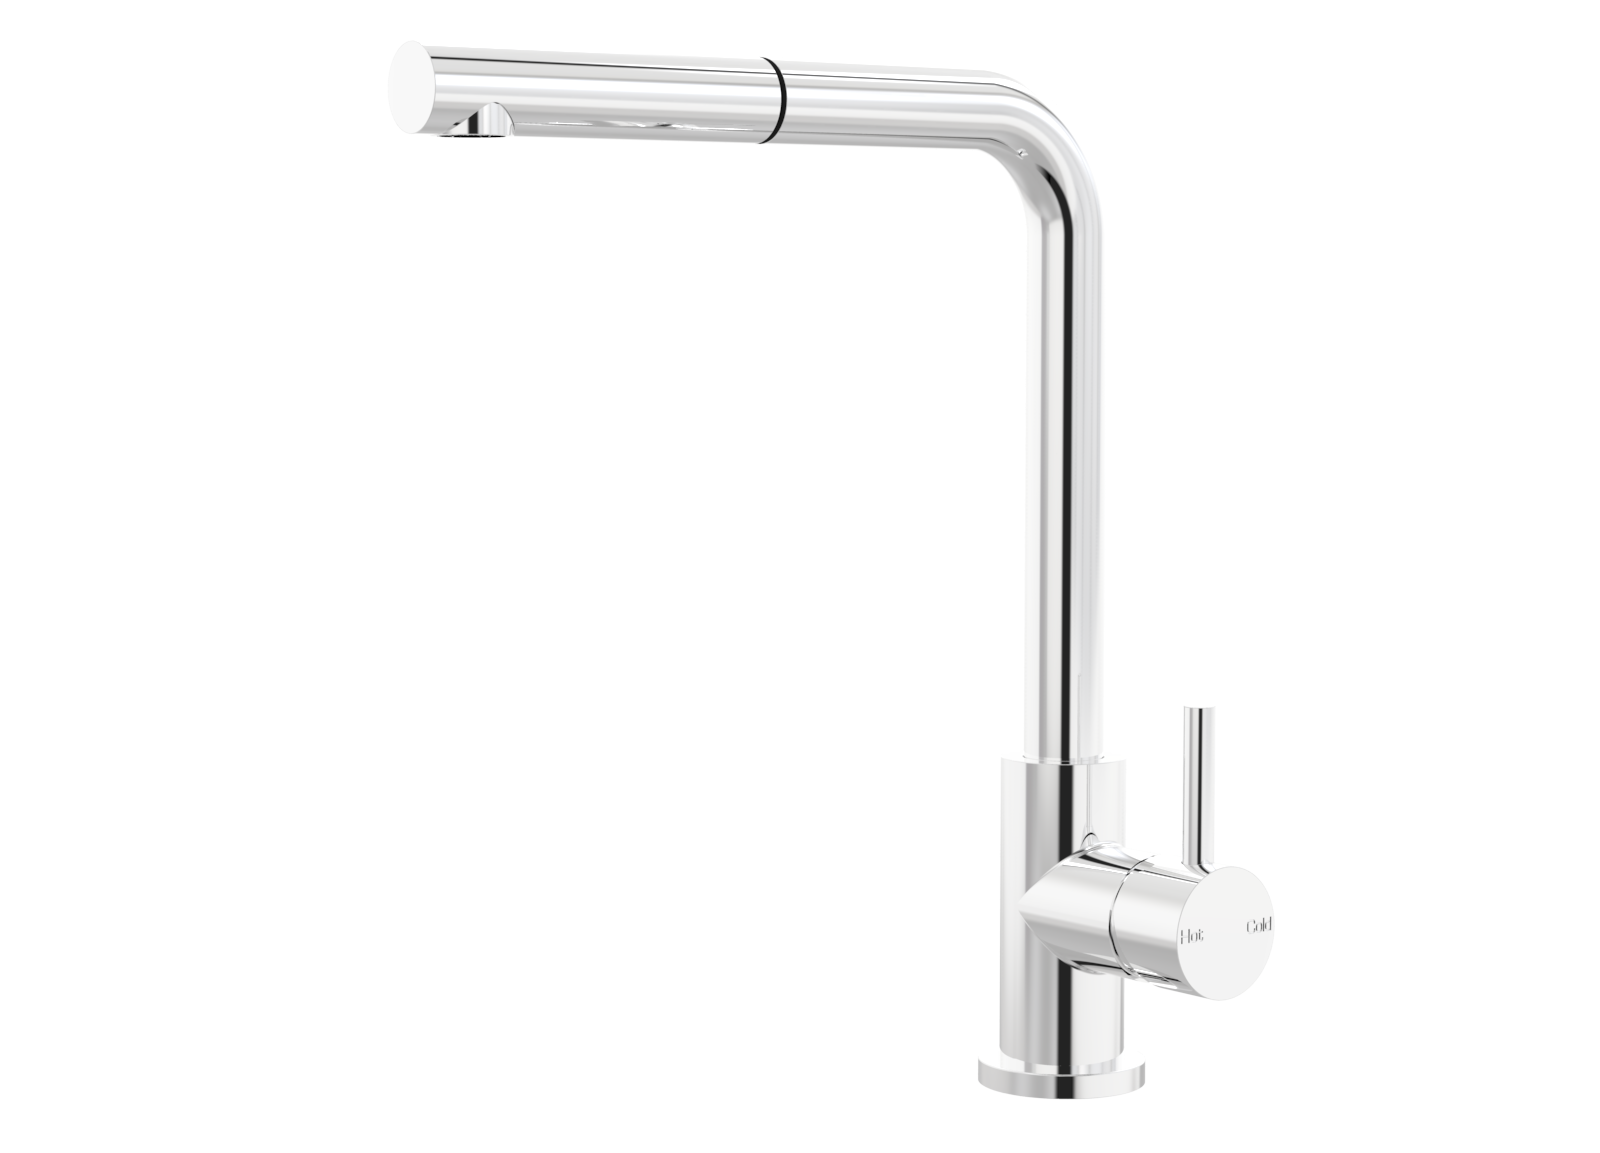 Par Taps Lugano Sink Straight Pull-Out Mixer - Swivel